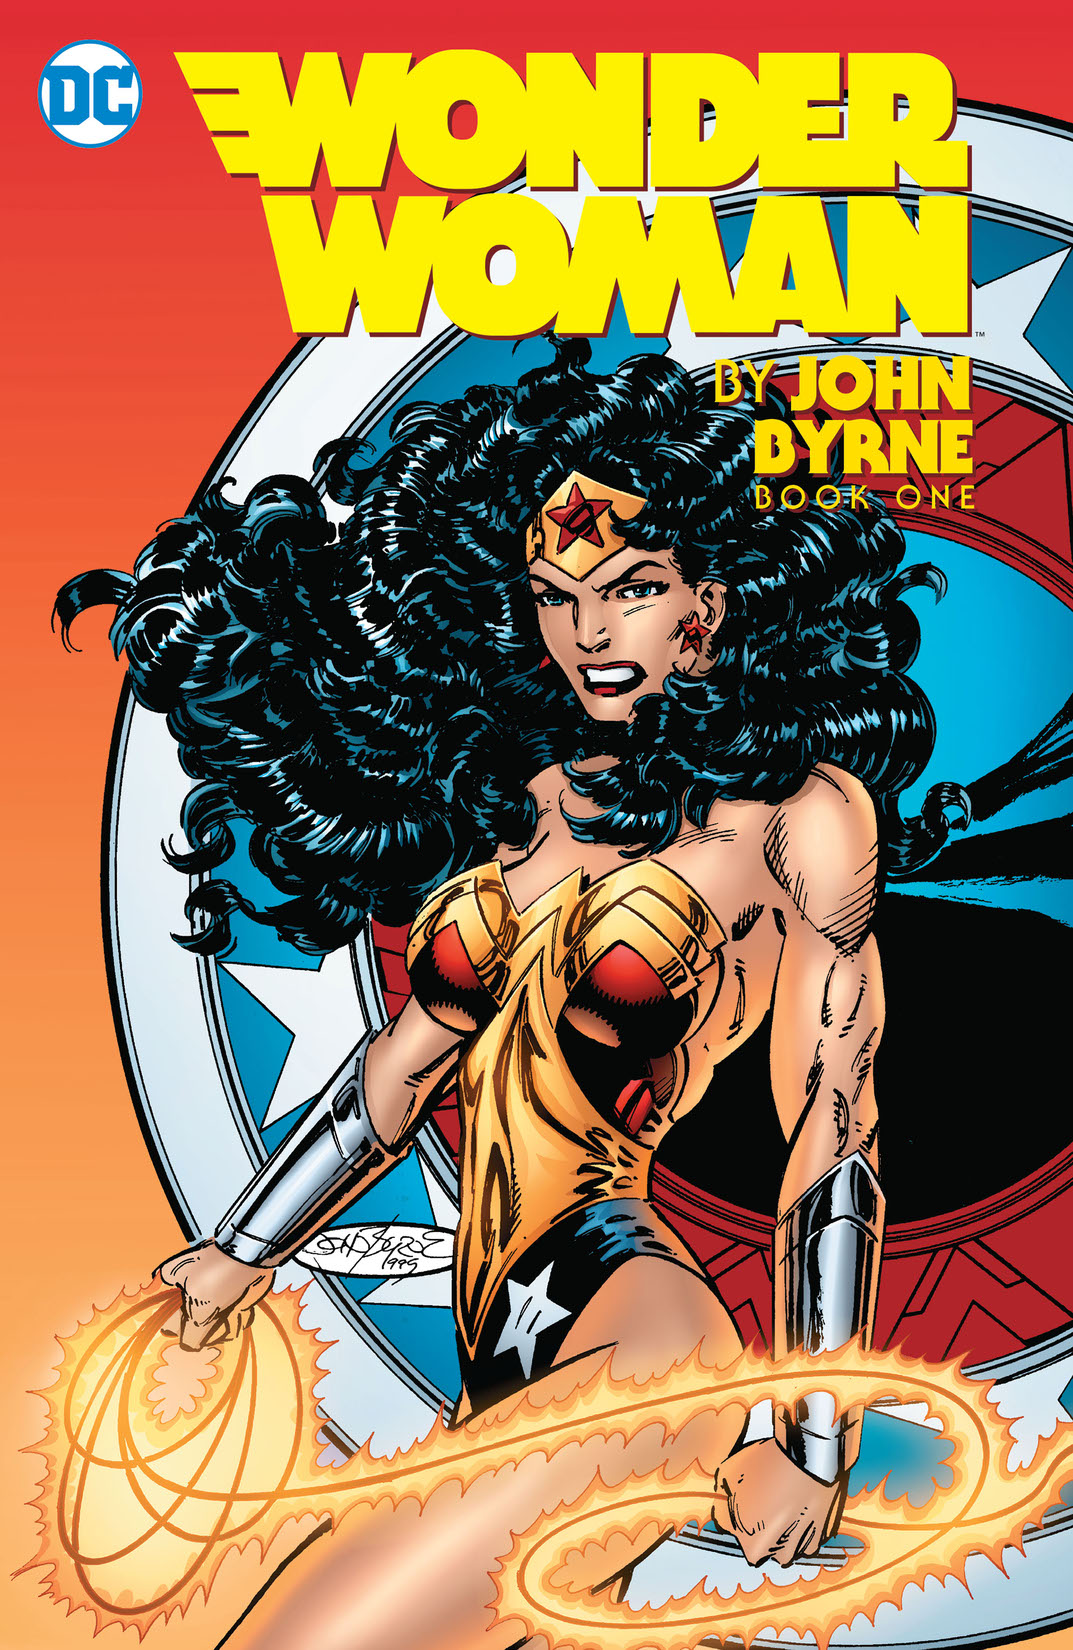 Wonder Woman by John Byrne Vol. 1 preview images